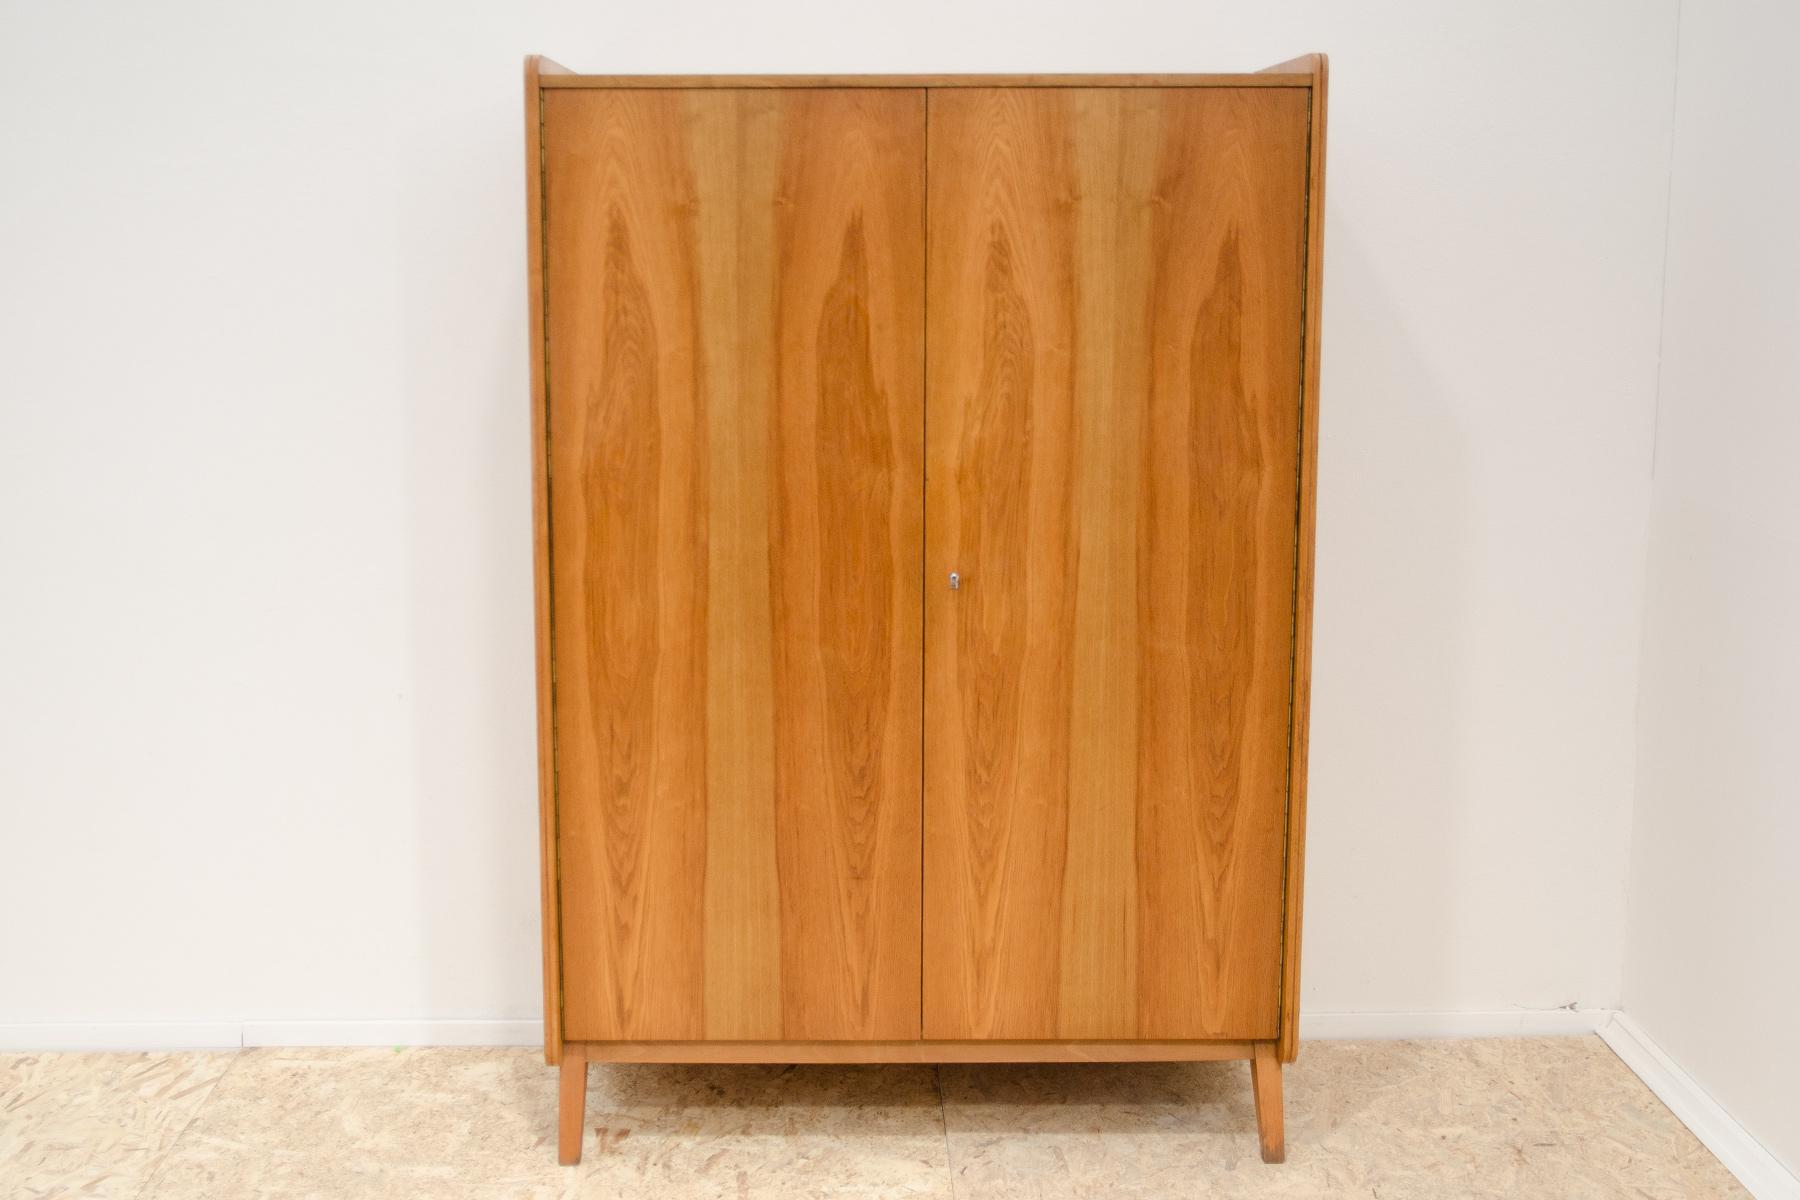 This wardrobe was designed by František Jirák for Tatra nábytok company in the former Czechoslovakia in the 1960´s

It´s made of ashwood and plywood.

You can hang your clothes in it,  place underwear, etc.

In very good Vintage condition, showing